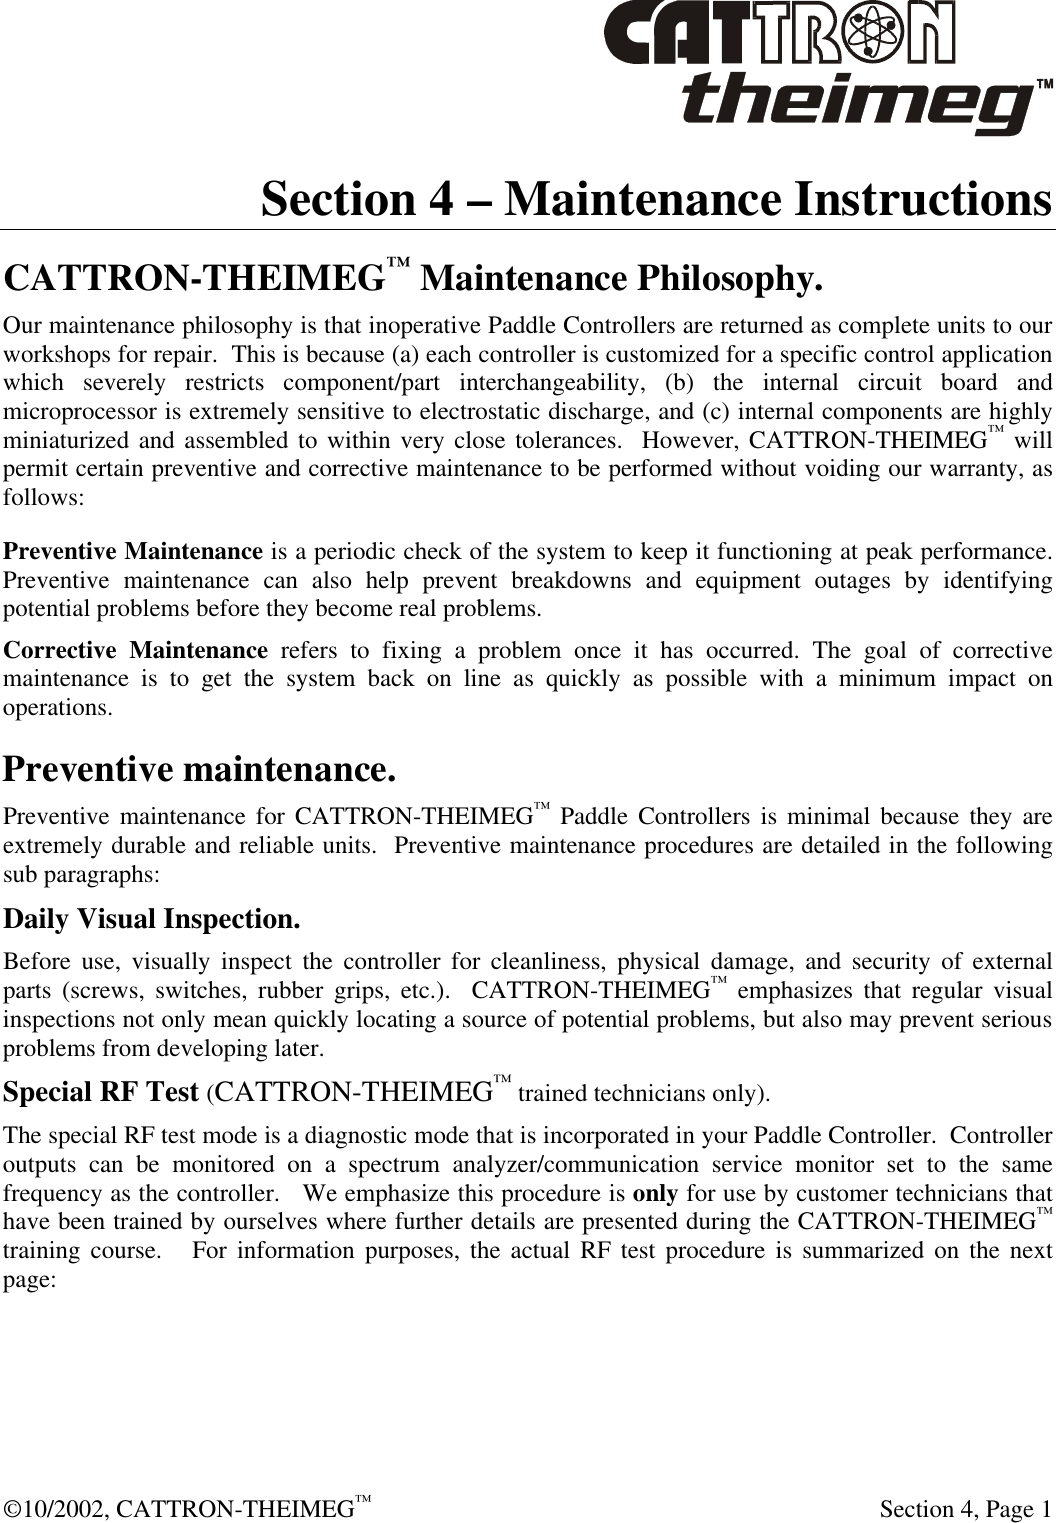  ©10/2002, CATTRON-THEIMEG™   Section 4, Page 1 Section 4 – Maintenance Instructions CATTRON-THEIMEG™ Maintenance Philosophy. Our maintenance philosophy is that inoperative Paddle Controllers are returned as complete units to our workshops for repair.  This is because (a) each controller is customized for a specific control application which severely restricts component/part interchangeability, (b) the internal circuit board and microprocessor is extremely sensitive to electrostatic discharge, and (c) internal components are highly miniaturized and assembled to within very close tolerances.  However, CATTRON-THEIMEG™ will permit certain preventive and corrective maintenance to be performed without voiding our warranty, as follows:    Preventive Maintenance is a periodic check of the system to keep it functioning at peak performance. Preventive maintenance can also help prevent breakdowns and equipment outages by identifying potential problems before they become real problems.  Corrective Maintenance refers to fixing a problem once it has occurred. The goal of corrective maintenance is to get the system back on line as quickly as possible with a minimum impact on operations. Preventive maintenance. Preventive maintenance for CATTRON-THEIMEG™ Paddle Controllers is minimal because they are extremely durable and reliable units.  Preventive maintenance procedures are detailed in the following sub paragraphs: Daily Visual Inspection. Before use, visually inspect the controller for cleanliness, physical damage, and security of external parts (screws, switches, rubber grips, etc.).  CATTRON-THEIMEG™ emphasizes that regular visual inspections not only mean quickly locating a source of potential problems, but also may prevent serious problems from developing later. Special RF Test (CATTRON-THEIMEG™ trained technicians only). The special RF test mode is a diagnostic mode that is incorporated in your Paddle Controller.  Controller outputs can be monitored on a spectrum analyzer/communication service monitor set to the same frequency as the controller.   We emphasize this procedure is only for use by customer technicians that have been trained by ourselves where further details are presented during the CATTRON-THEIMEG™ training course.   For information purposes, the actual RF test procedure is summarized on the next page:   